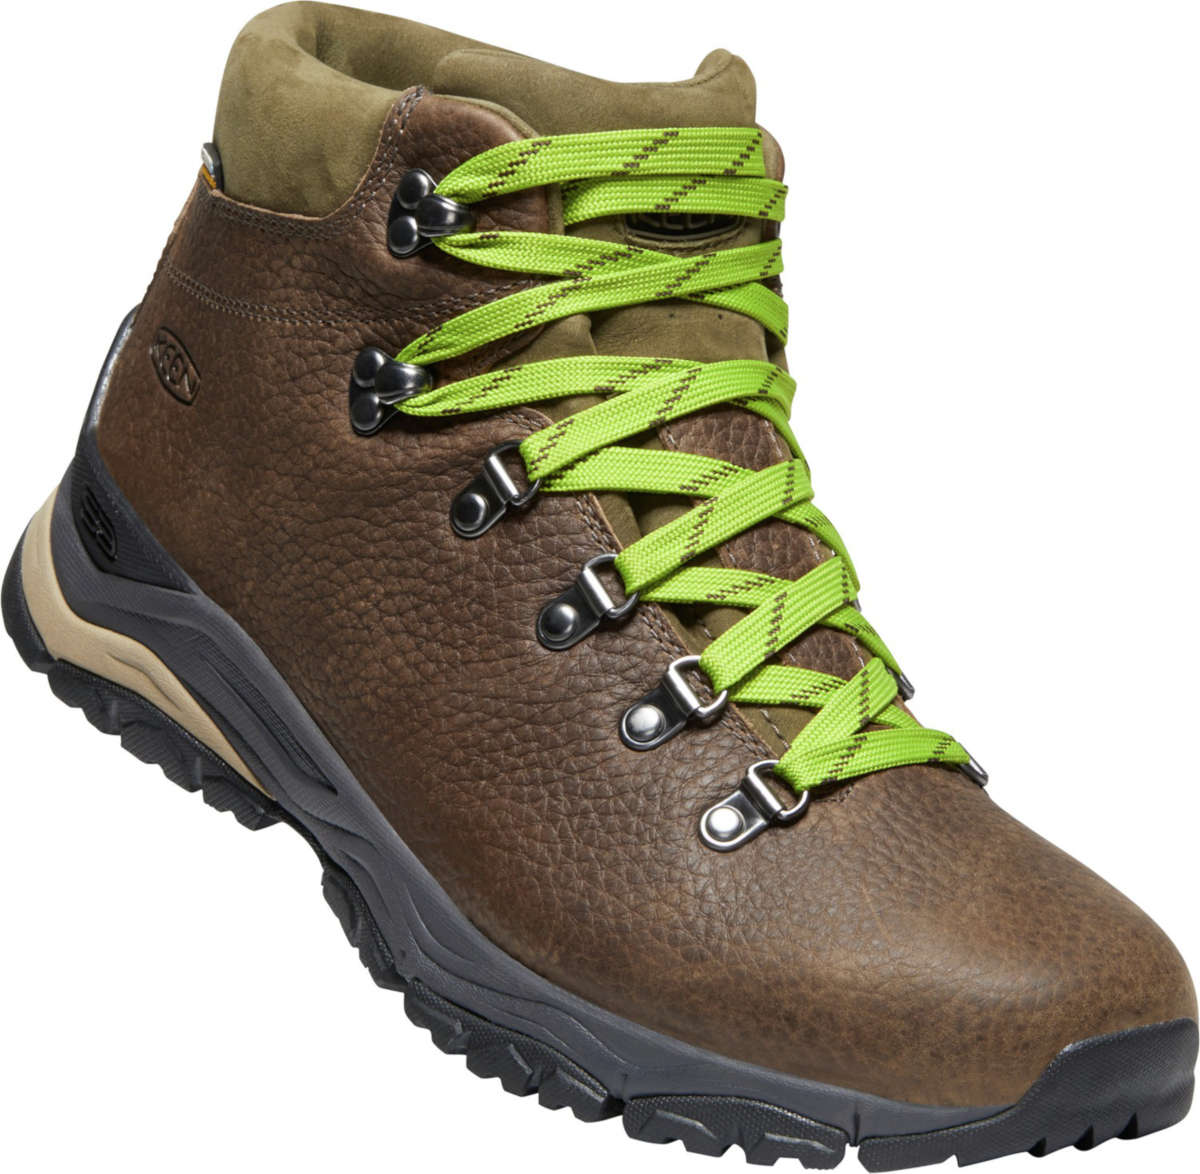 retro style hiking boots